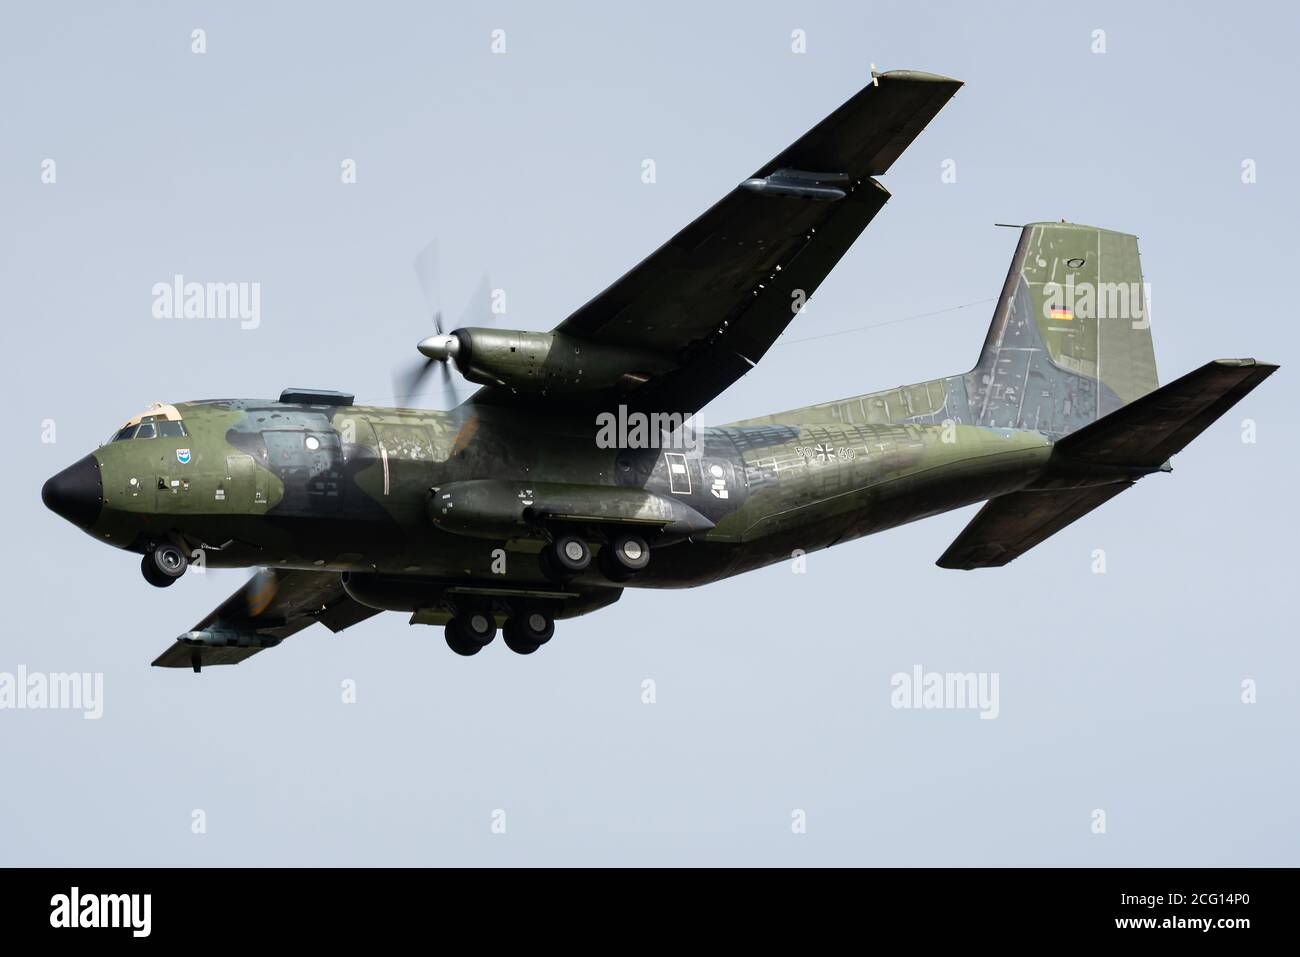 A Transall C-160 military transport aircraft of the German Air Force (Luftwaffe). Stock Photo